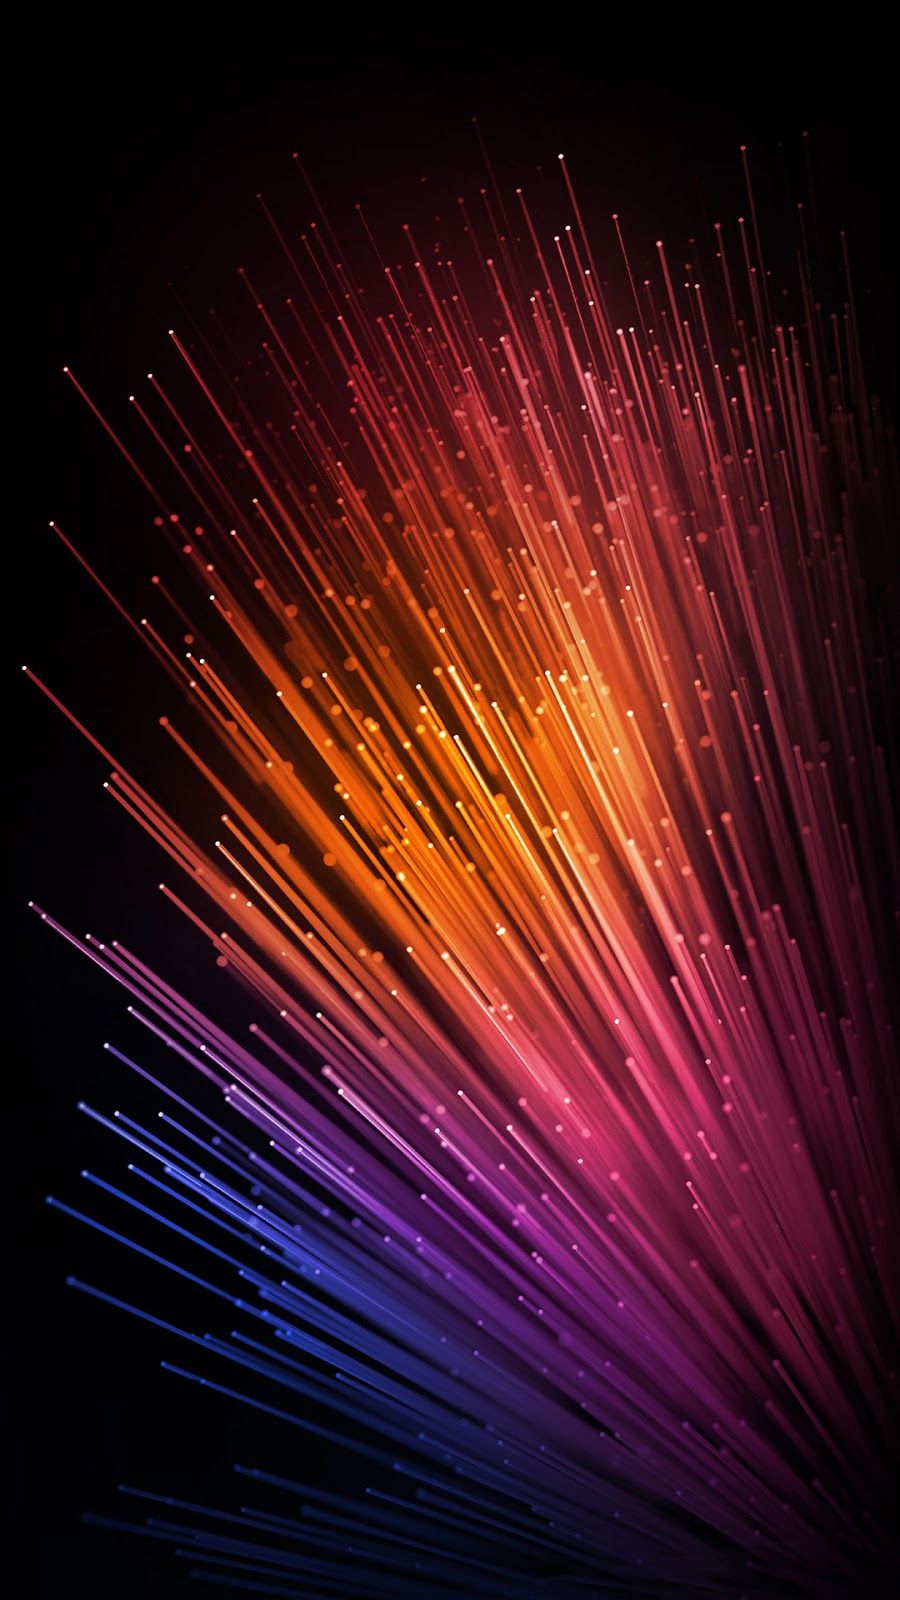 andras on MIx in 2019 Iphone wallpaper Xiaomi wallpapers